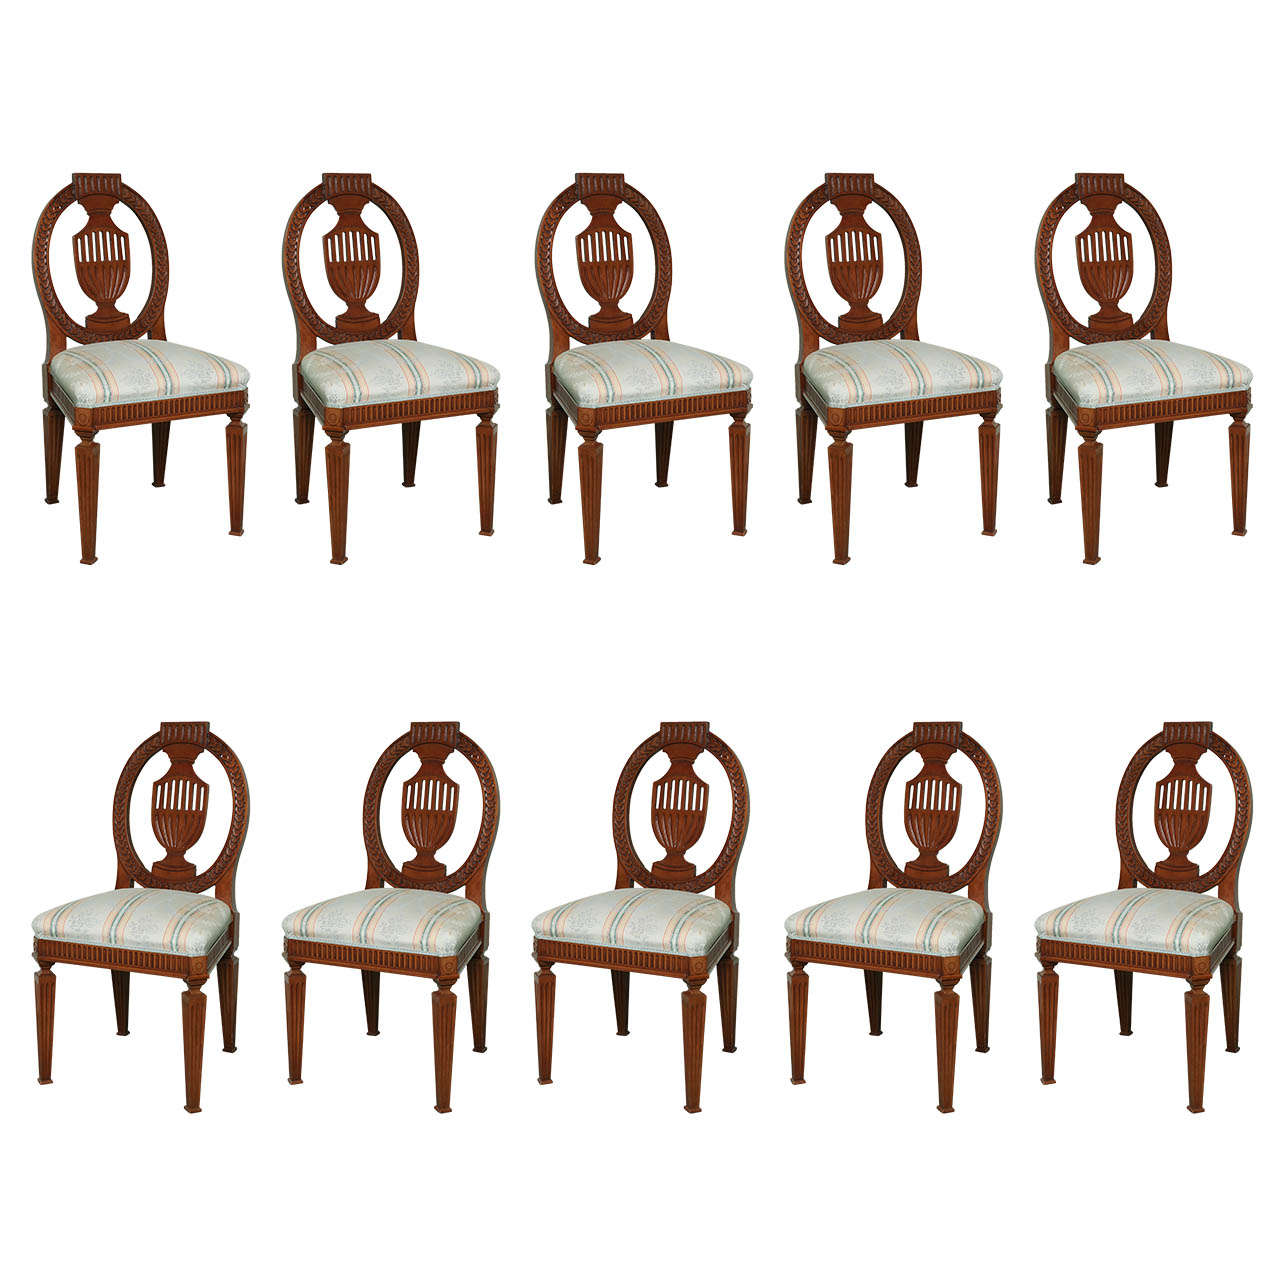 A Set of 10 Neoclassical Side Chairs